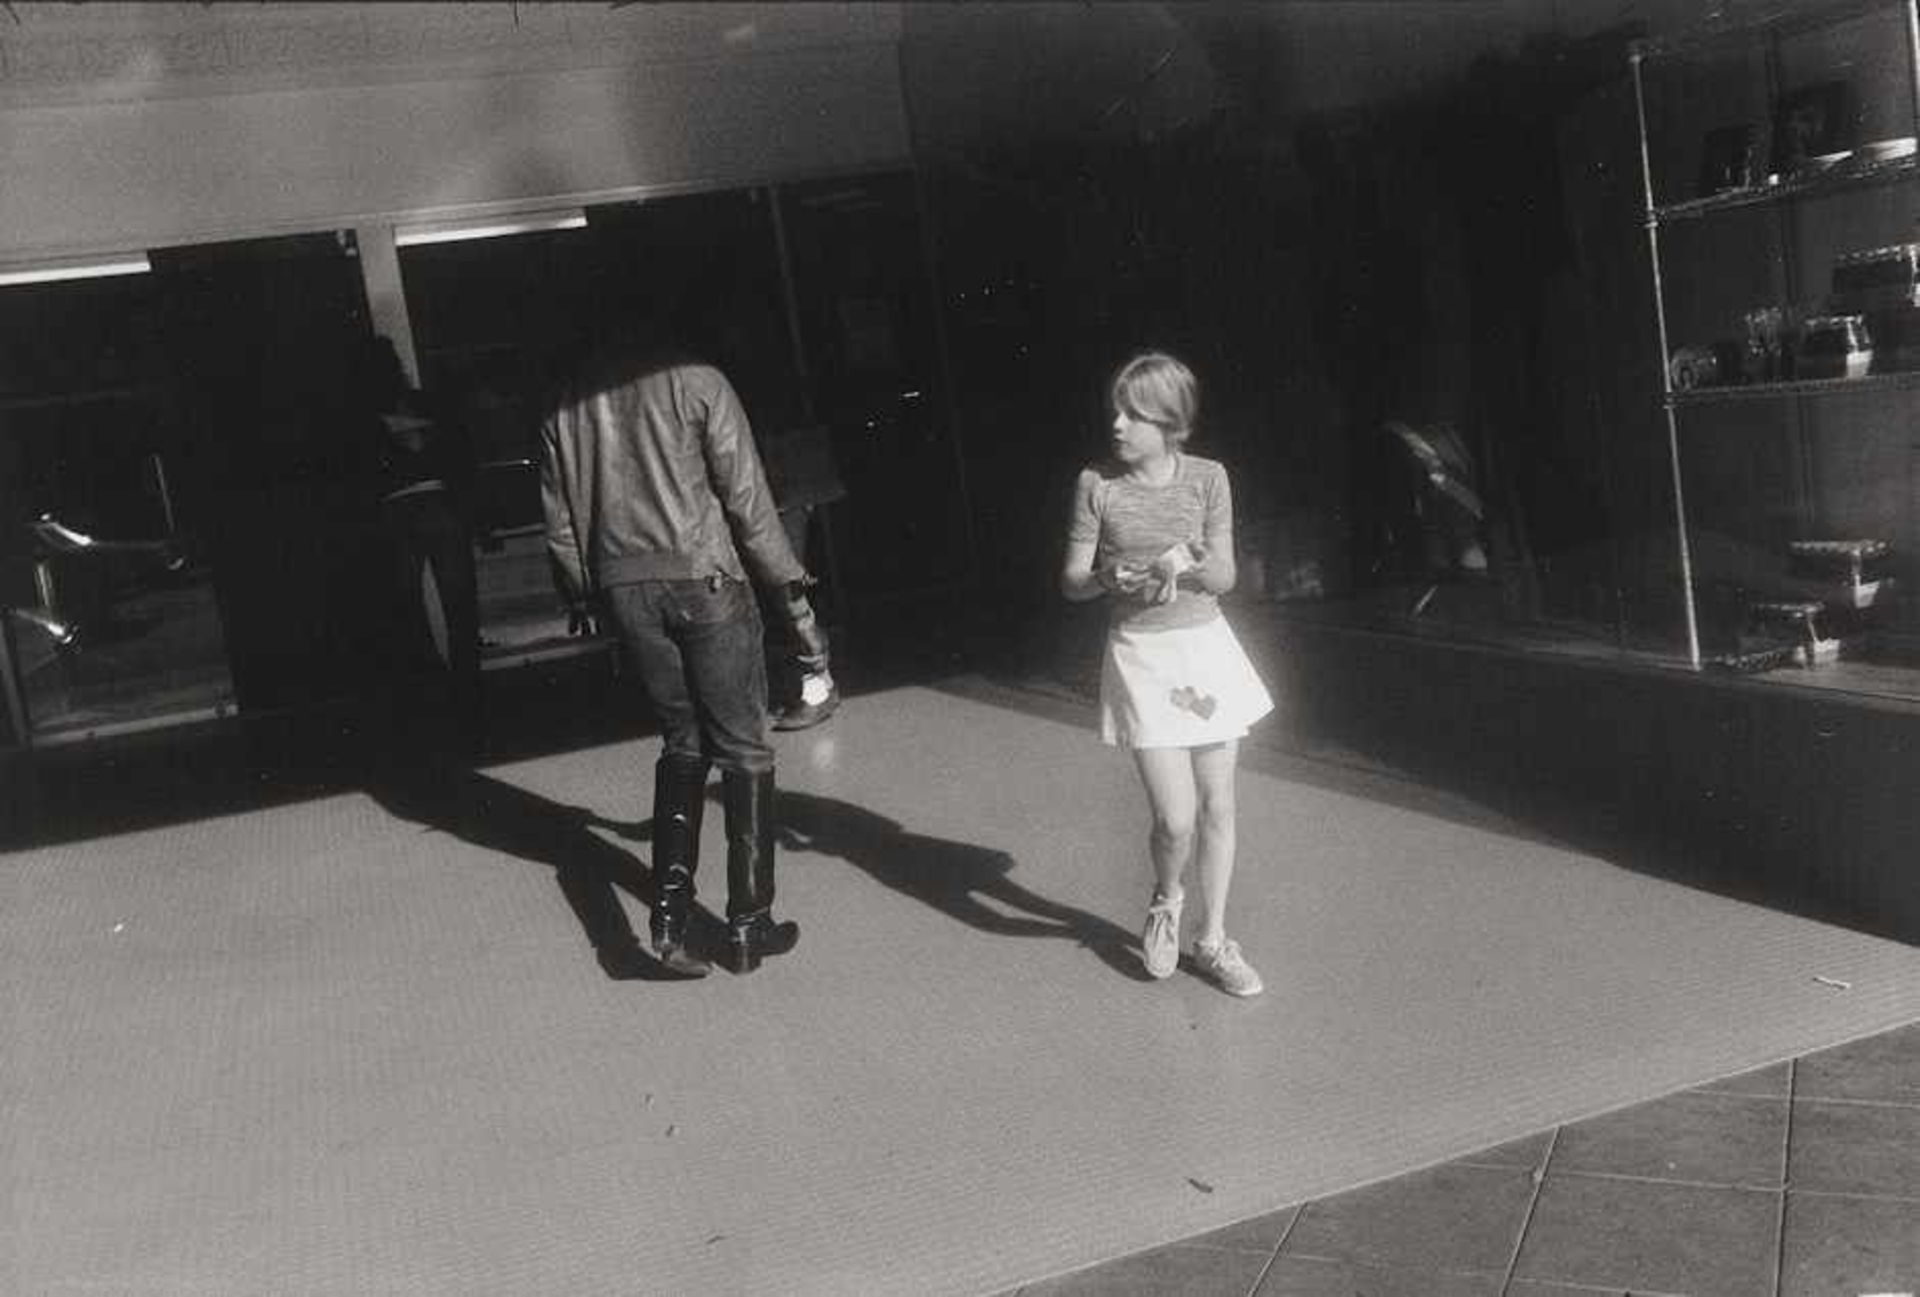 Winogrand, Garry: Women are Better Than Men. Not Only Have They Survived, They Do PrevailImage